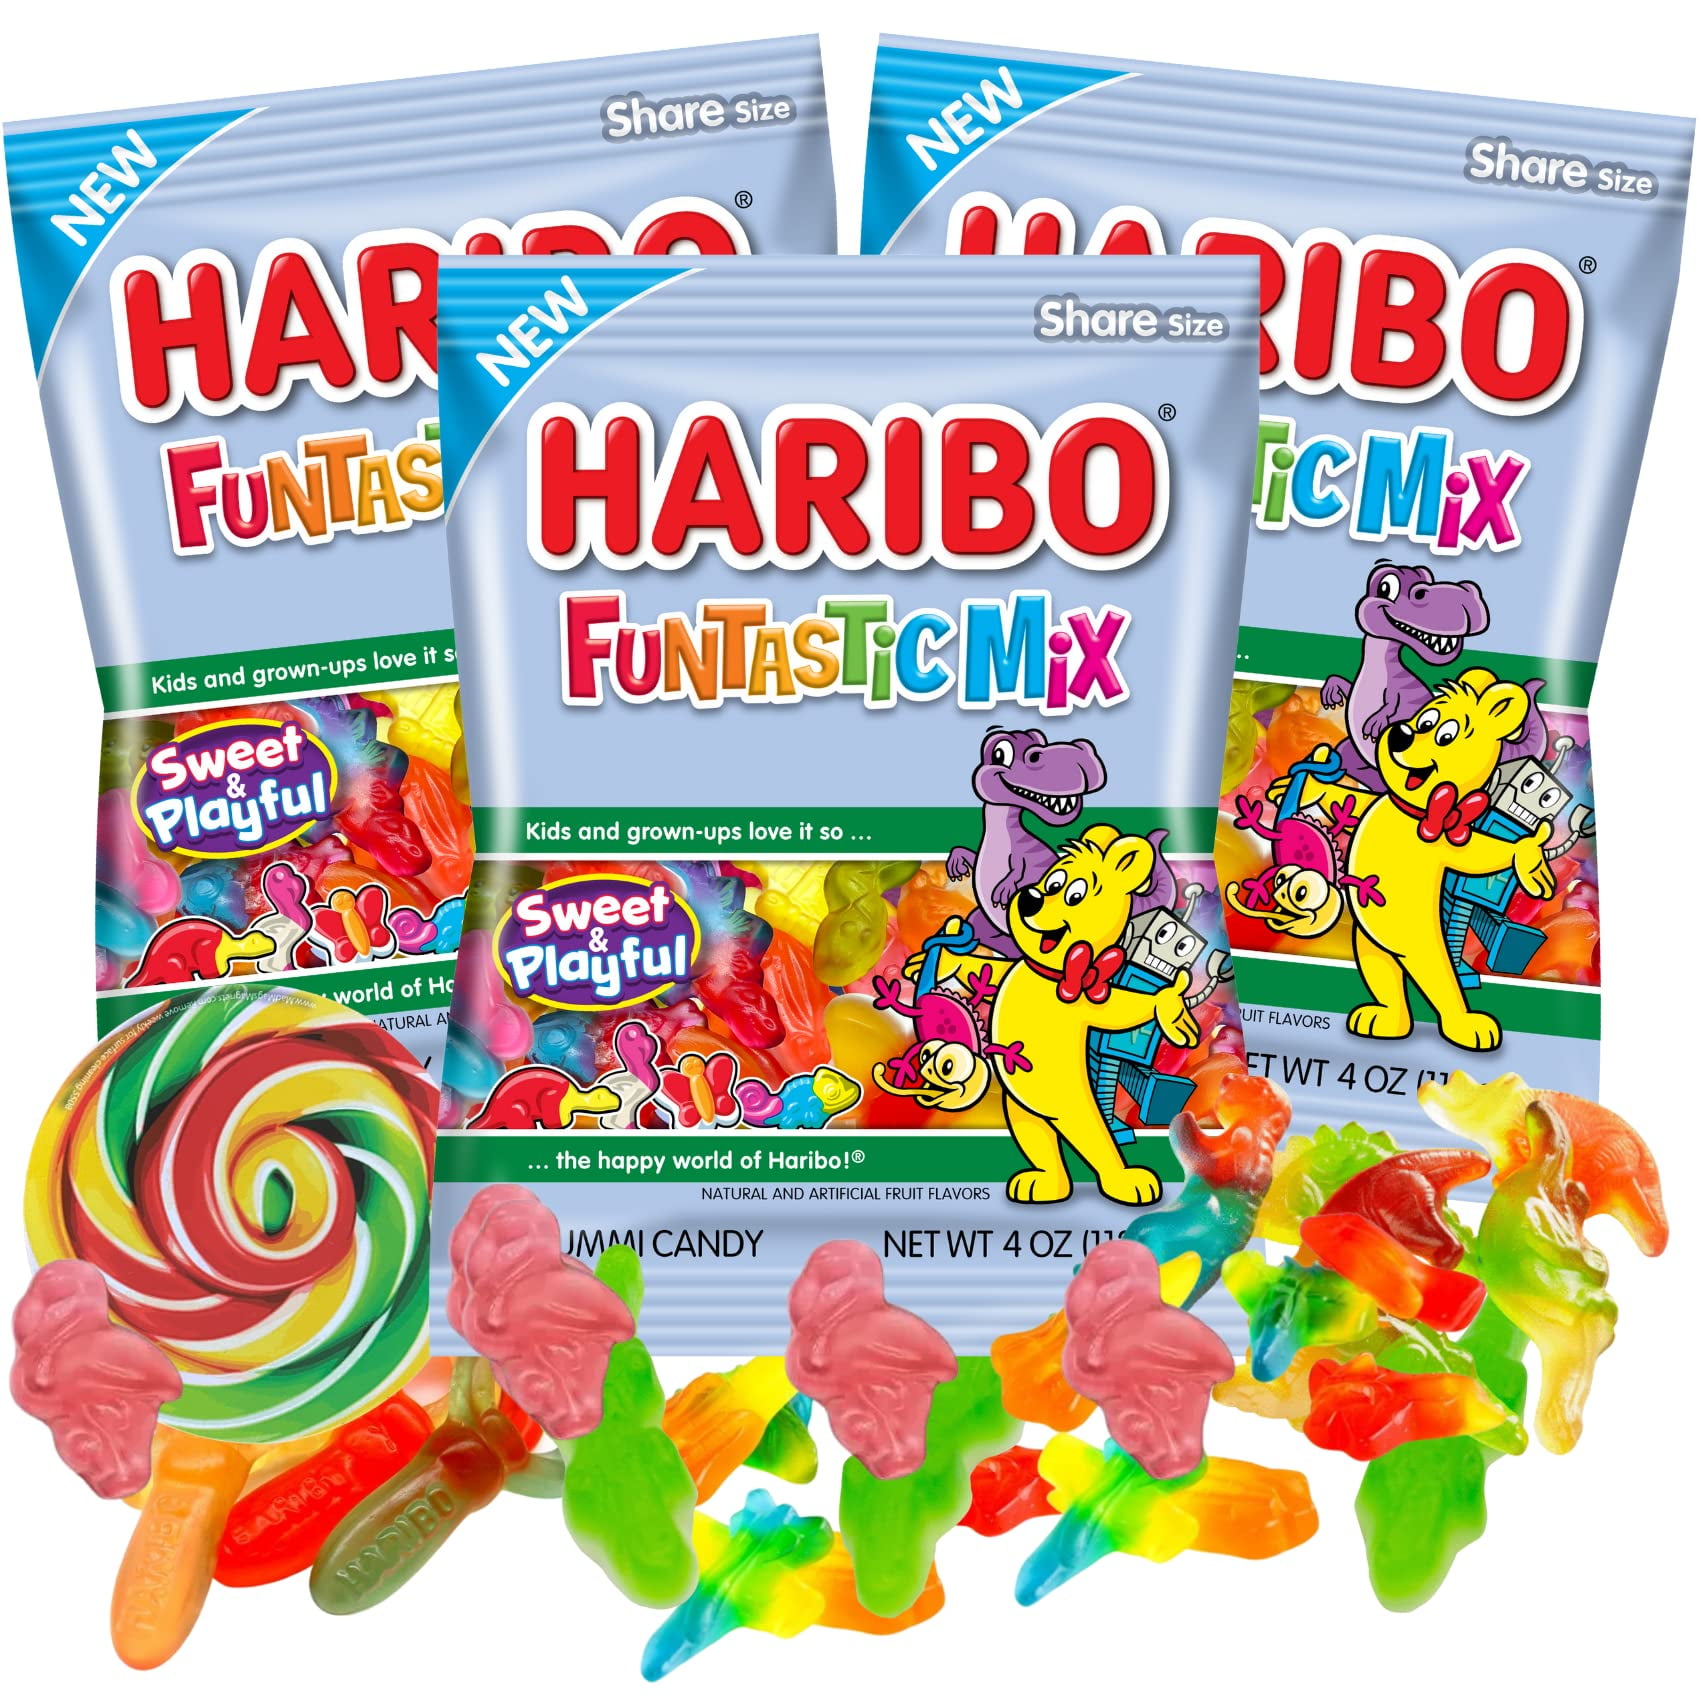 Gymnastik regulere undergrundsbane Haribo Funtastic Mix Gummis, Fruit Flavored Candy Bites, Summer Themed  Shareable Bagged Candies for Goodie Bags and Ice Cream Toppers, Pack of 3 -  Walmart.com